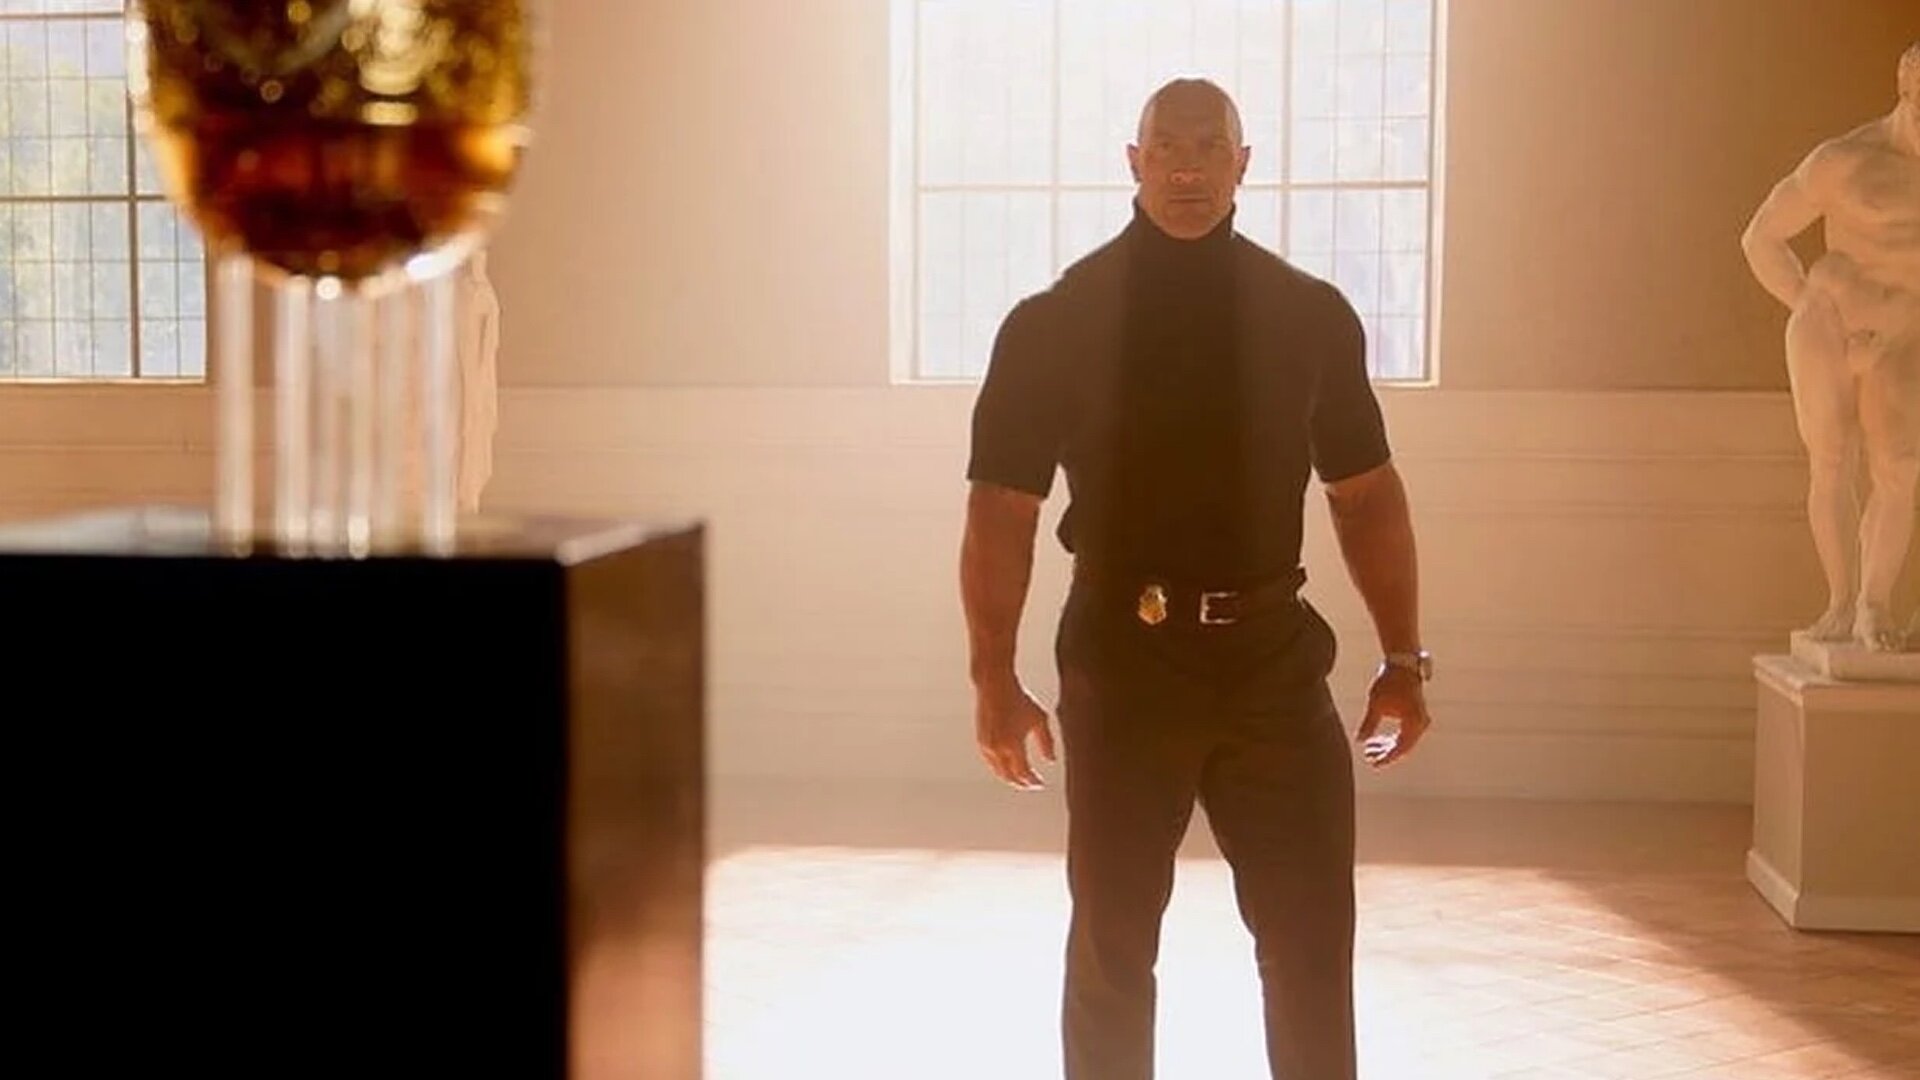 Dwayne Johnson Hd Red Notice Movie Wallpapers